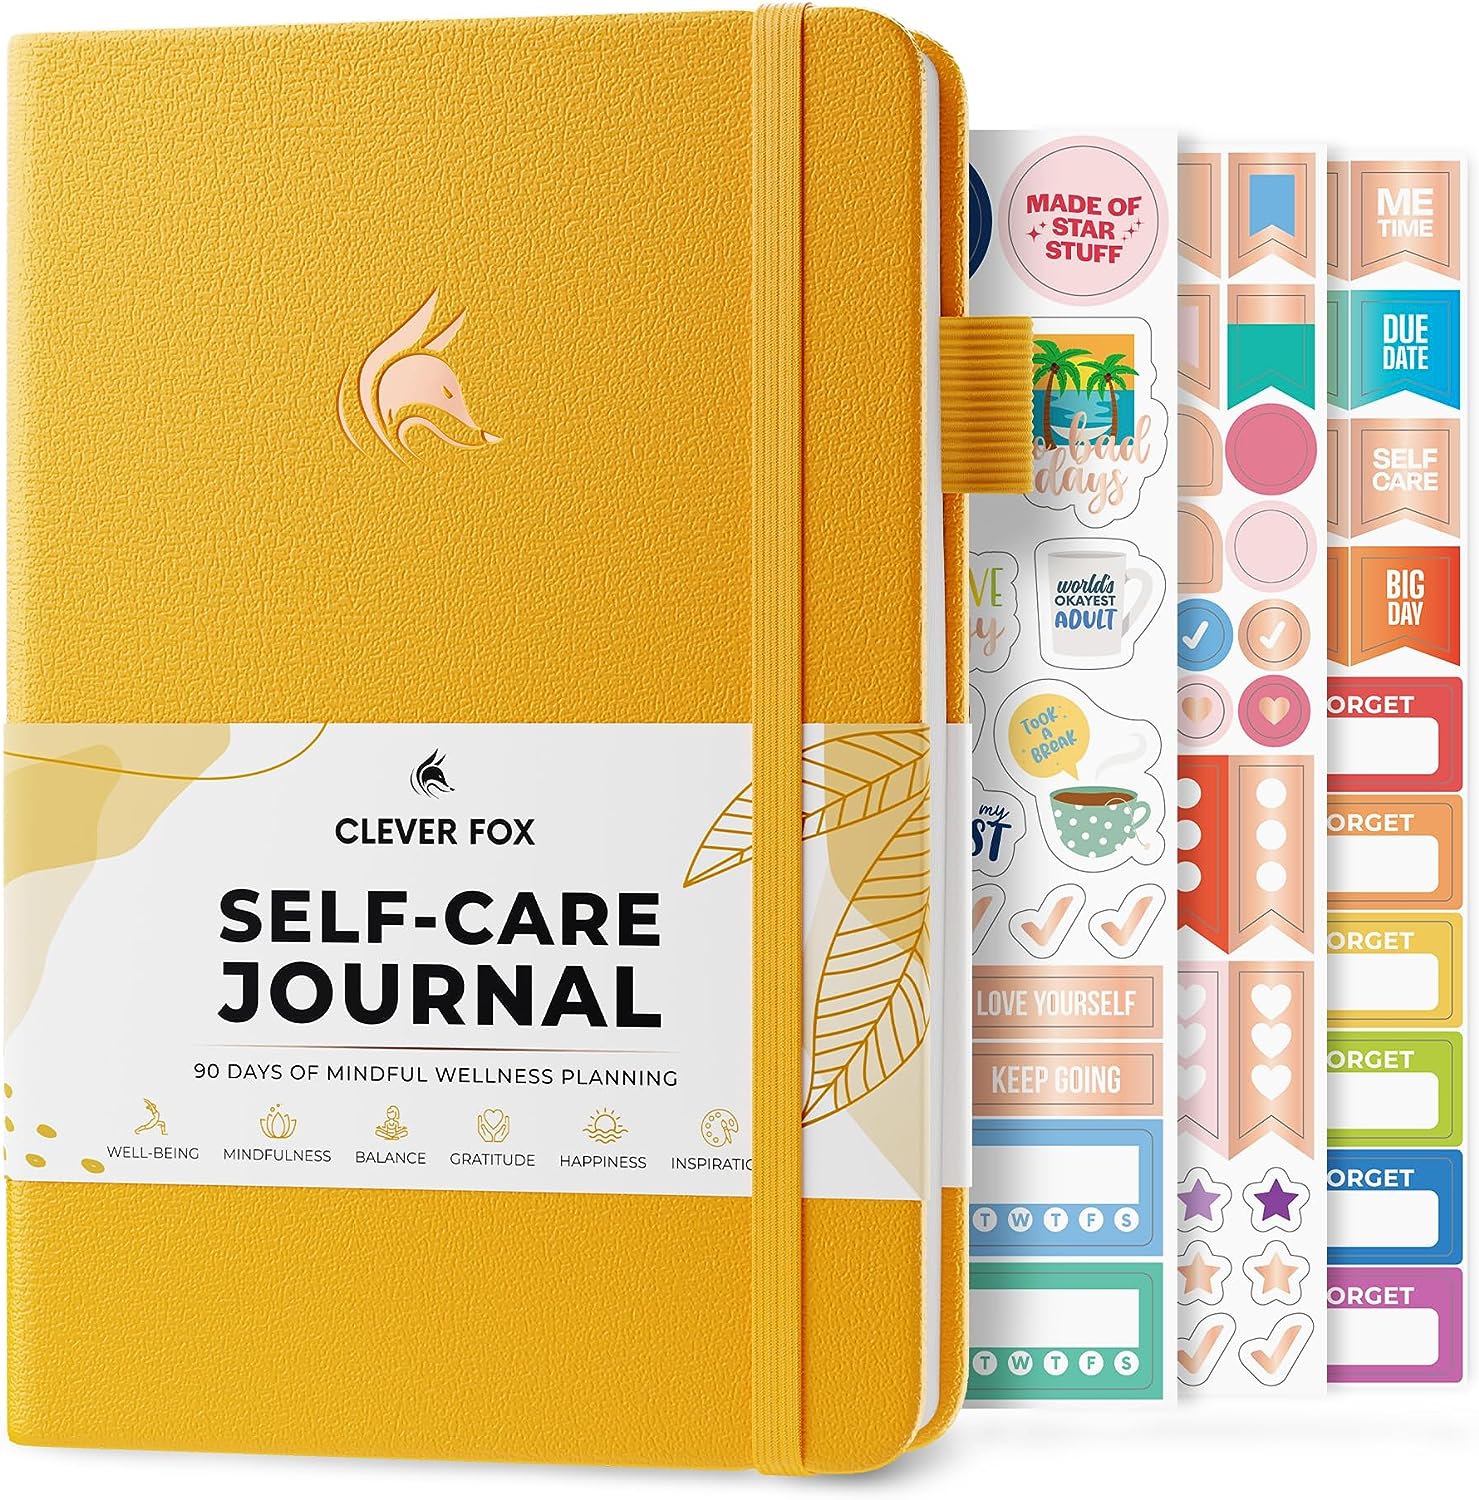 Clever Fox Self-Care Journal – Wellness & Daily Reflection Notebook – Mental Health & Personal Development Journal – Self Care Planner, Meditation & Mood Journal for Women & Men – A5 Size (Amber Yellow)